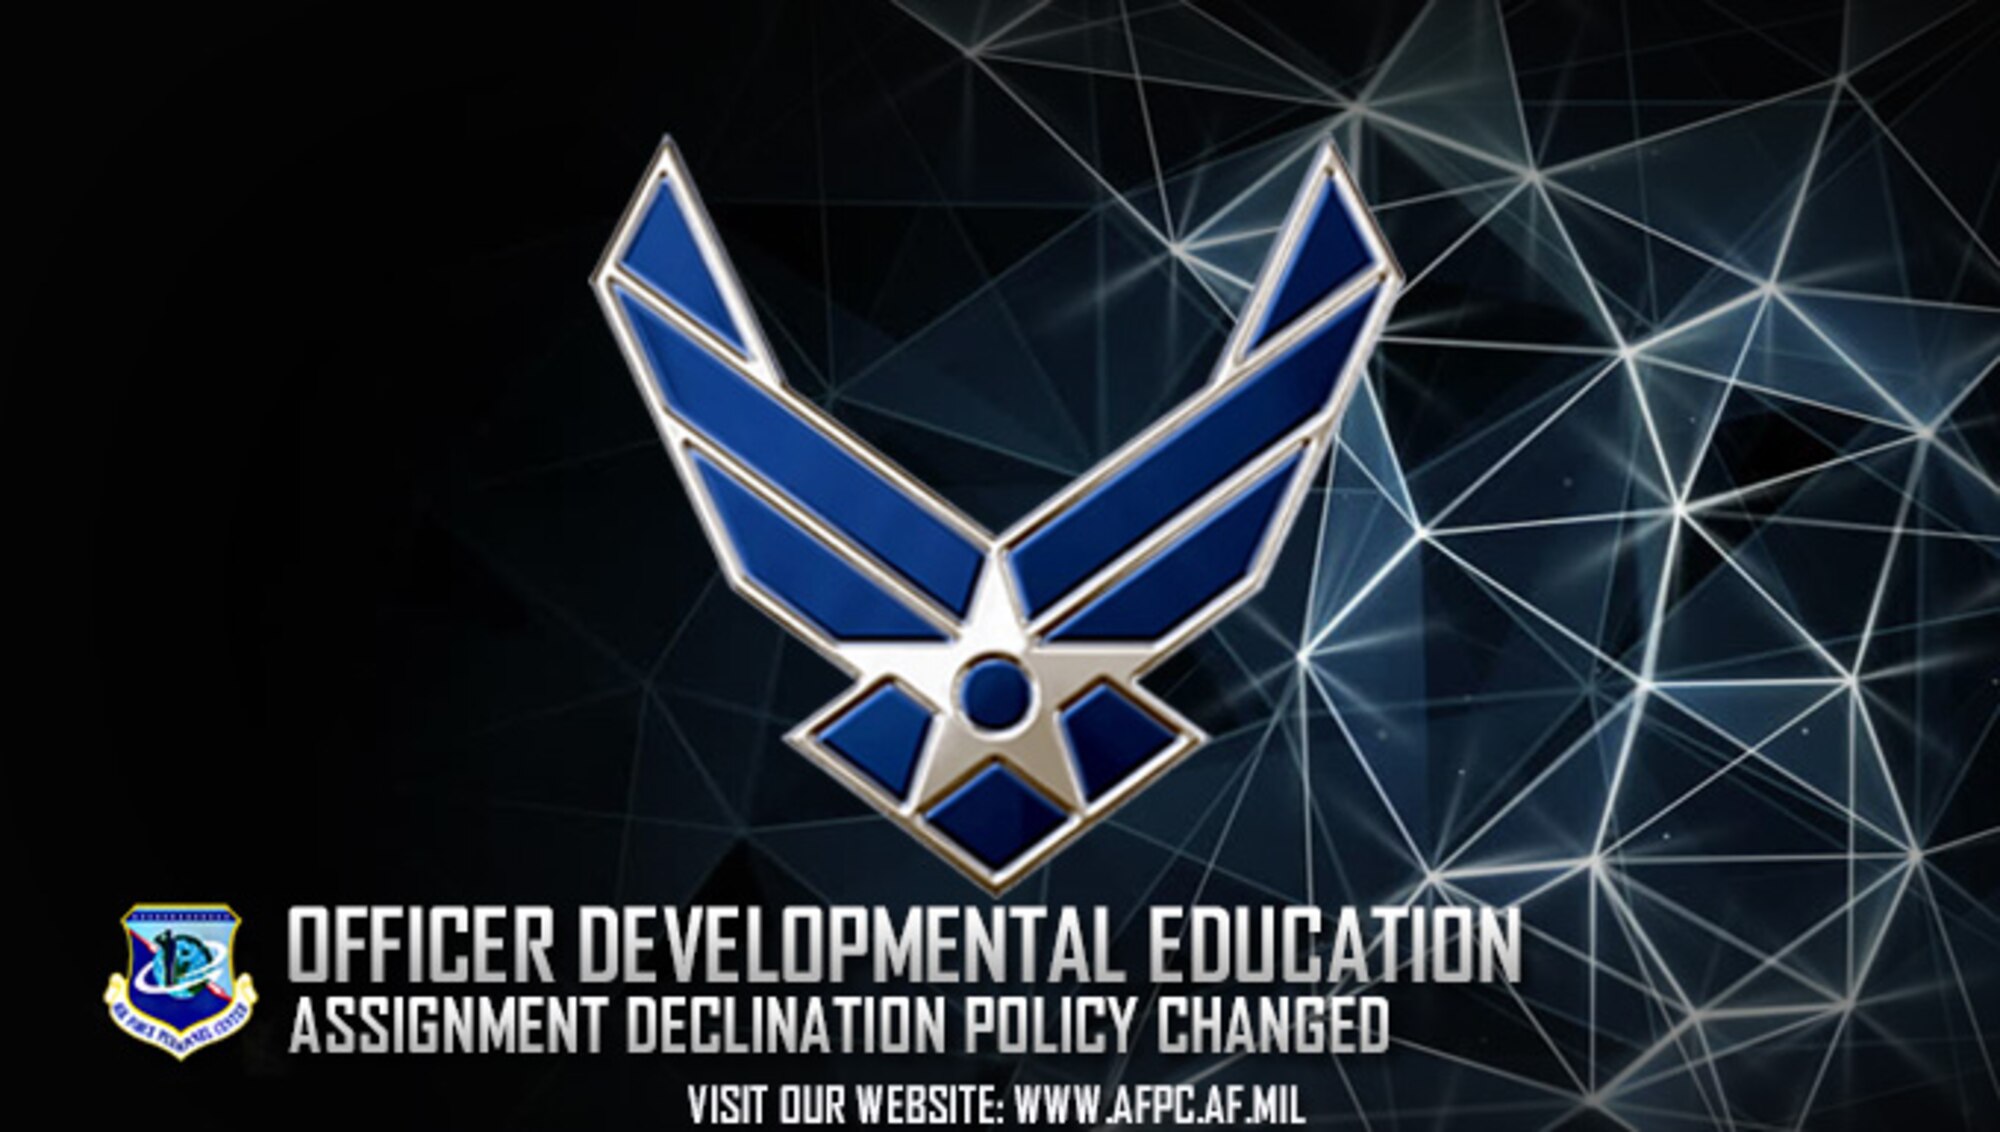 A change to policy will allow officers selected for in-residence intermediate and senior developmental education to decline the DE assignment without the implications of the seven-day option policy. (U.S. Air Force graphic by Staff Sgt. Alexx Pons)